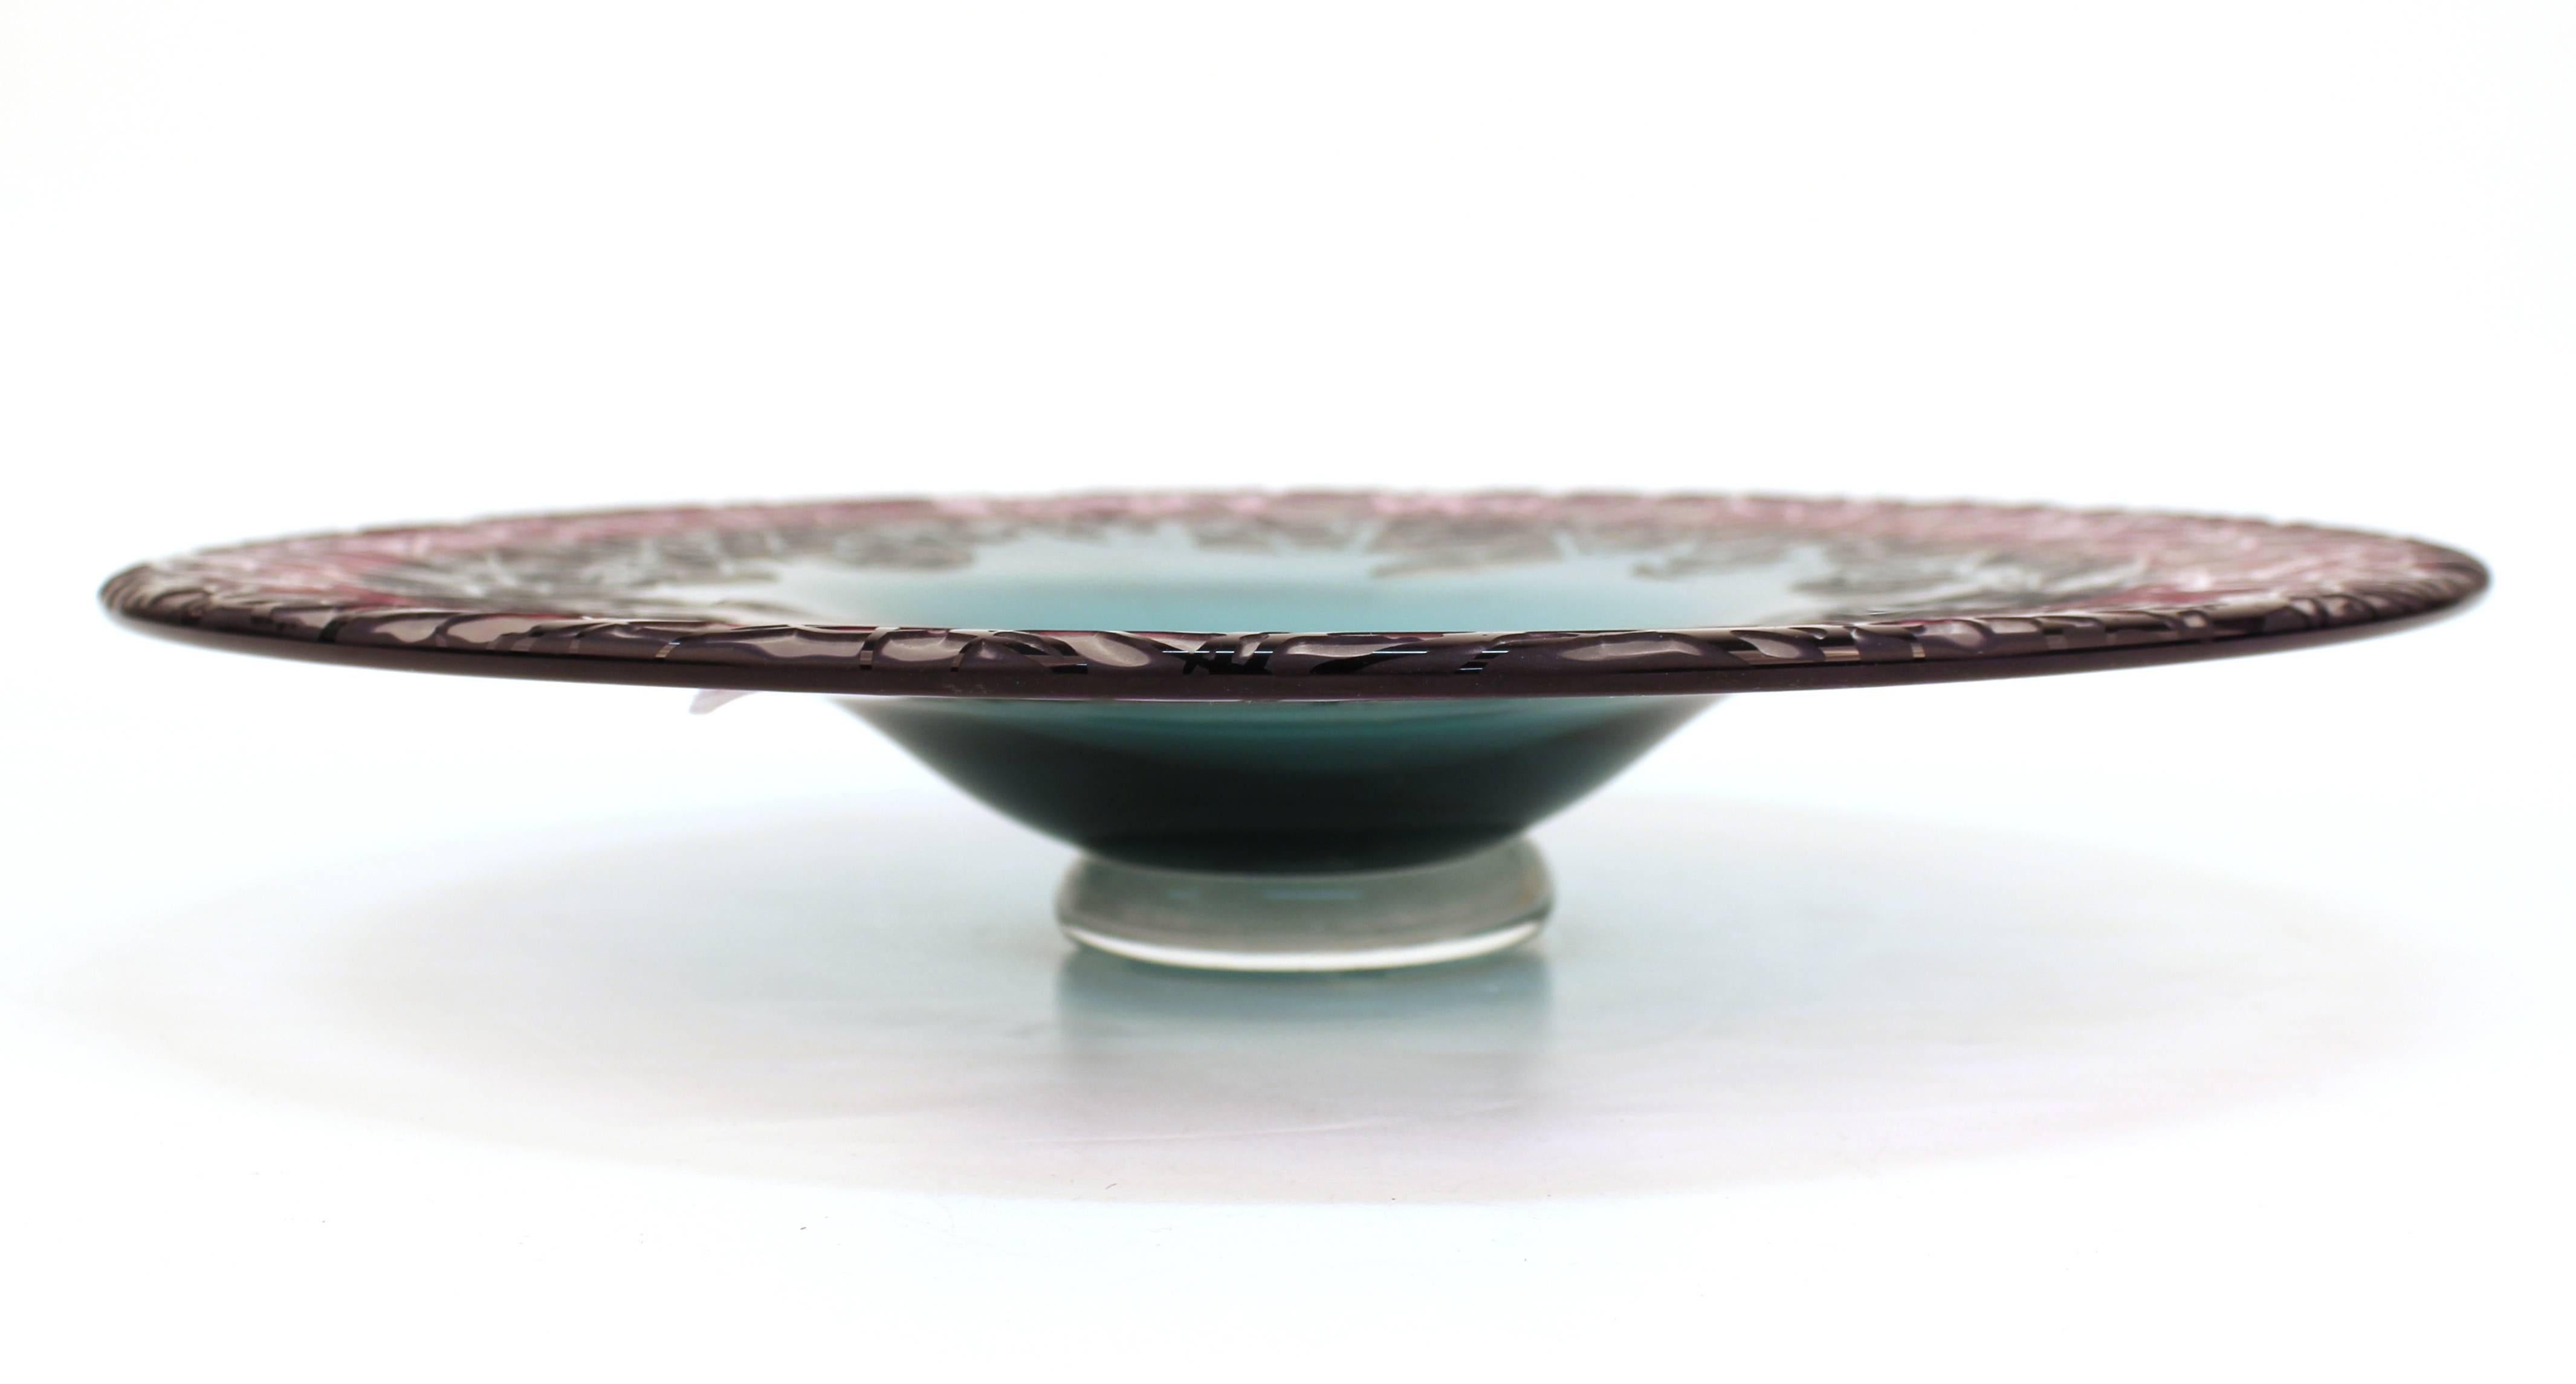 Canadian studio art glass compote dish made by Cheryl Takacs. The piece is layered in multiple shades and has a wide decorative border.